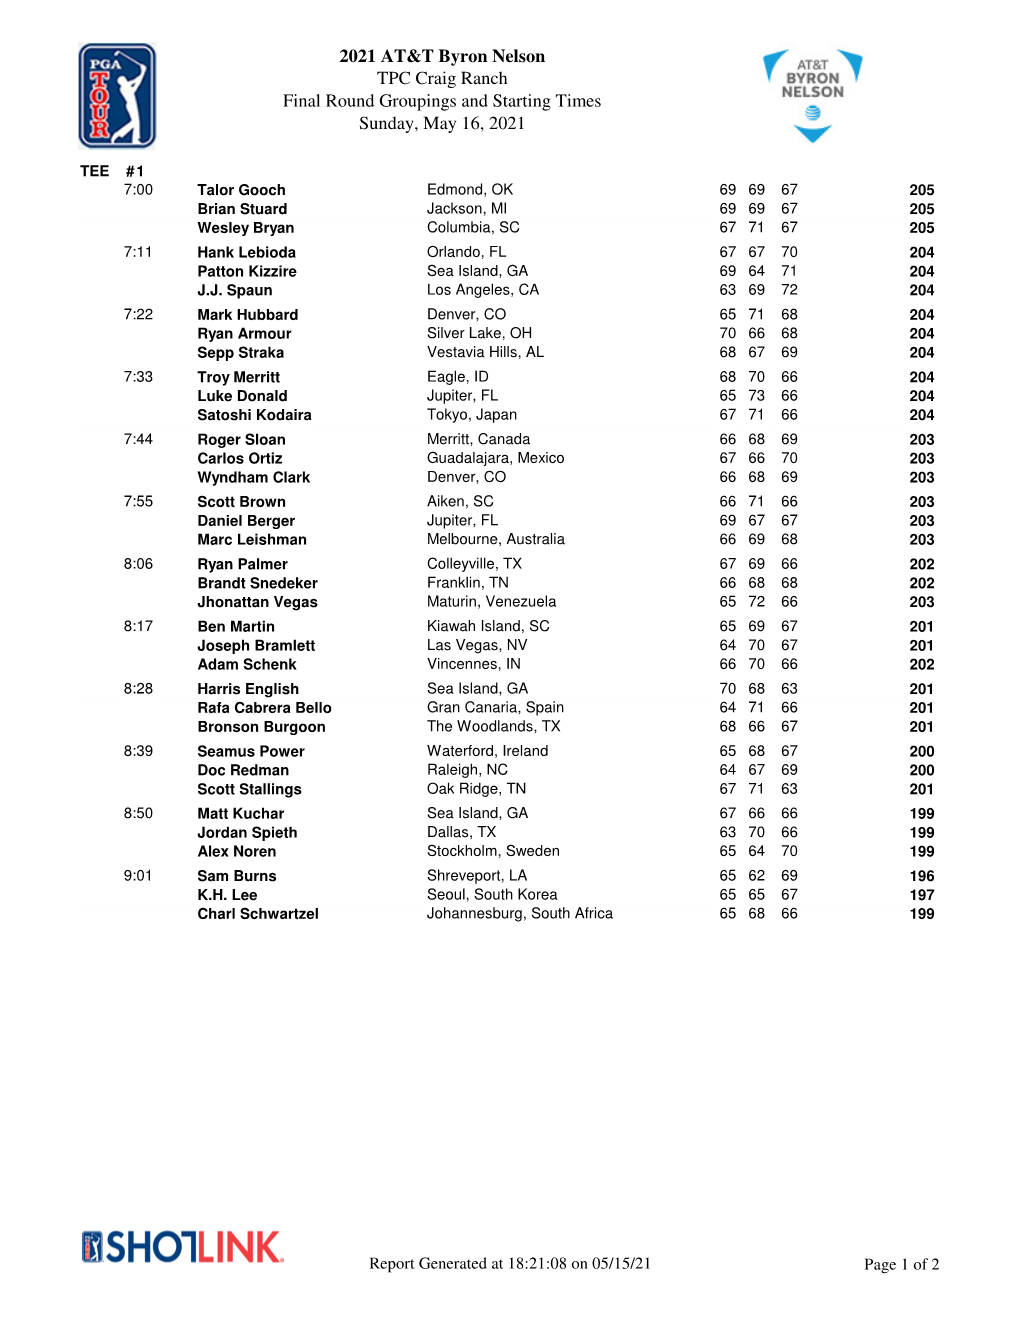 2021 AT&T Byron Nelson TPC Craig Ranch Final Round Groupings And